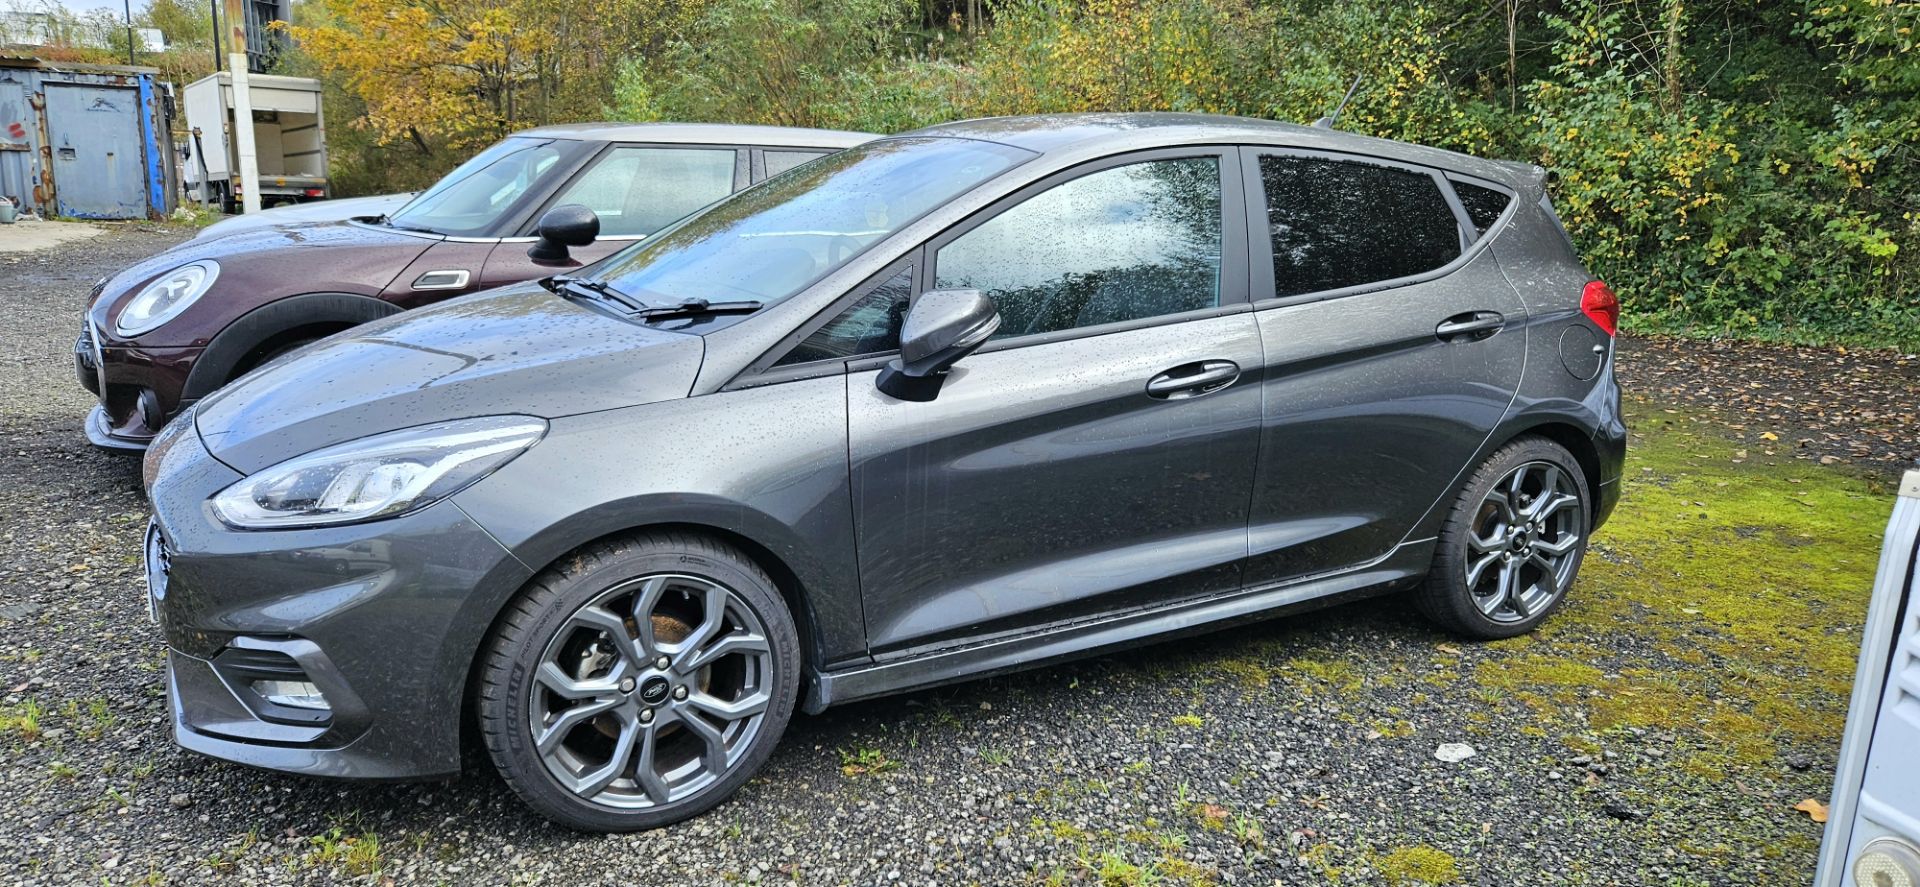 2019 FORD FIESTA ST LINE 1 LITRE AUTOMATIC - Image 5 of 8